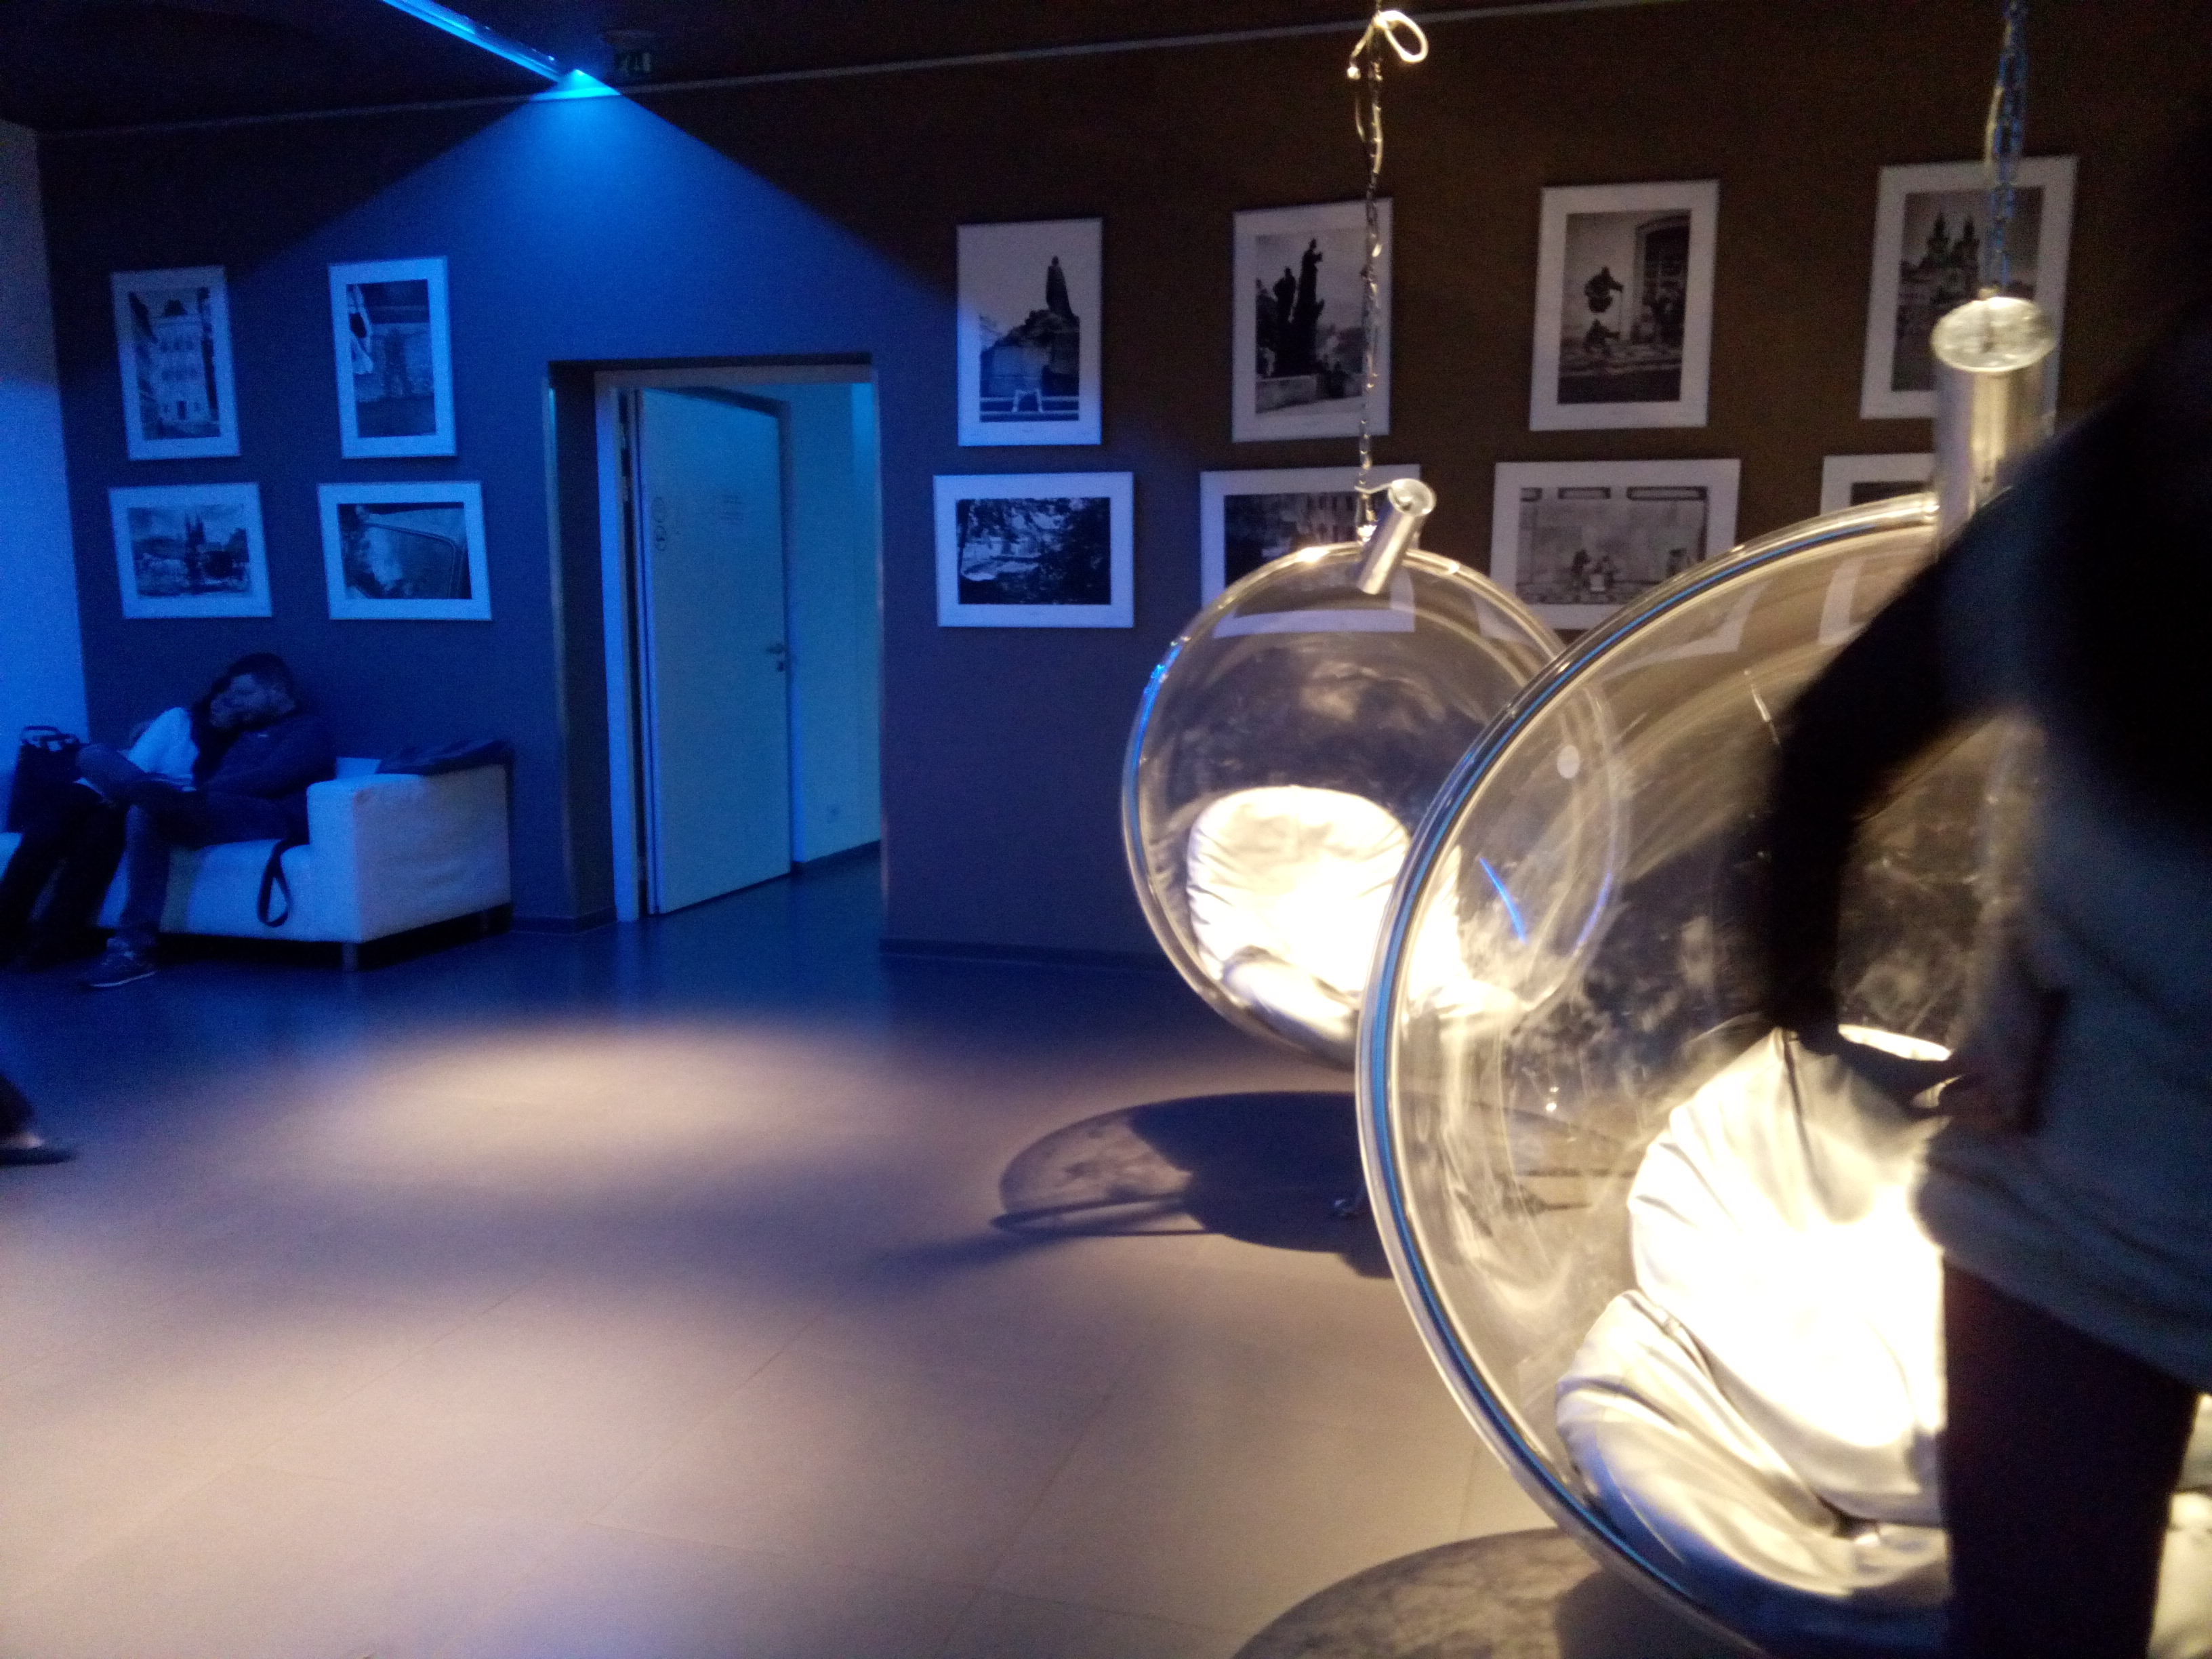 Transparent hanging egg-seats in a blue and grey dimly lit room